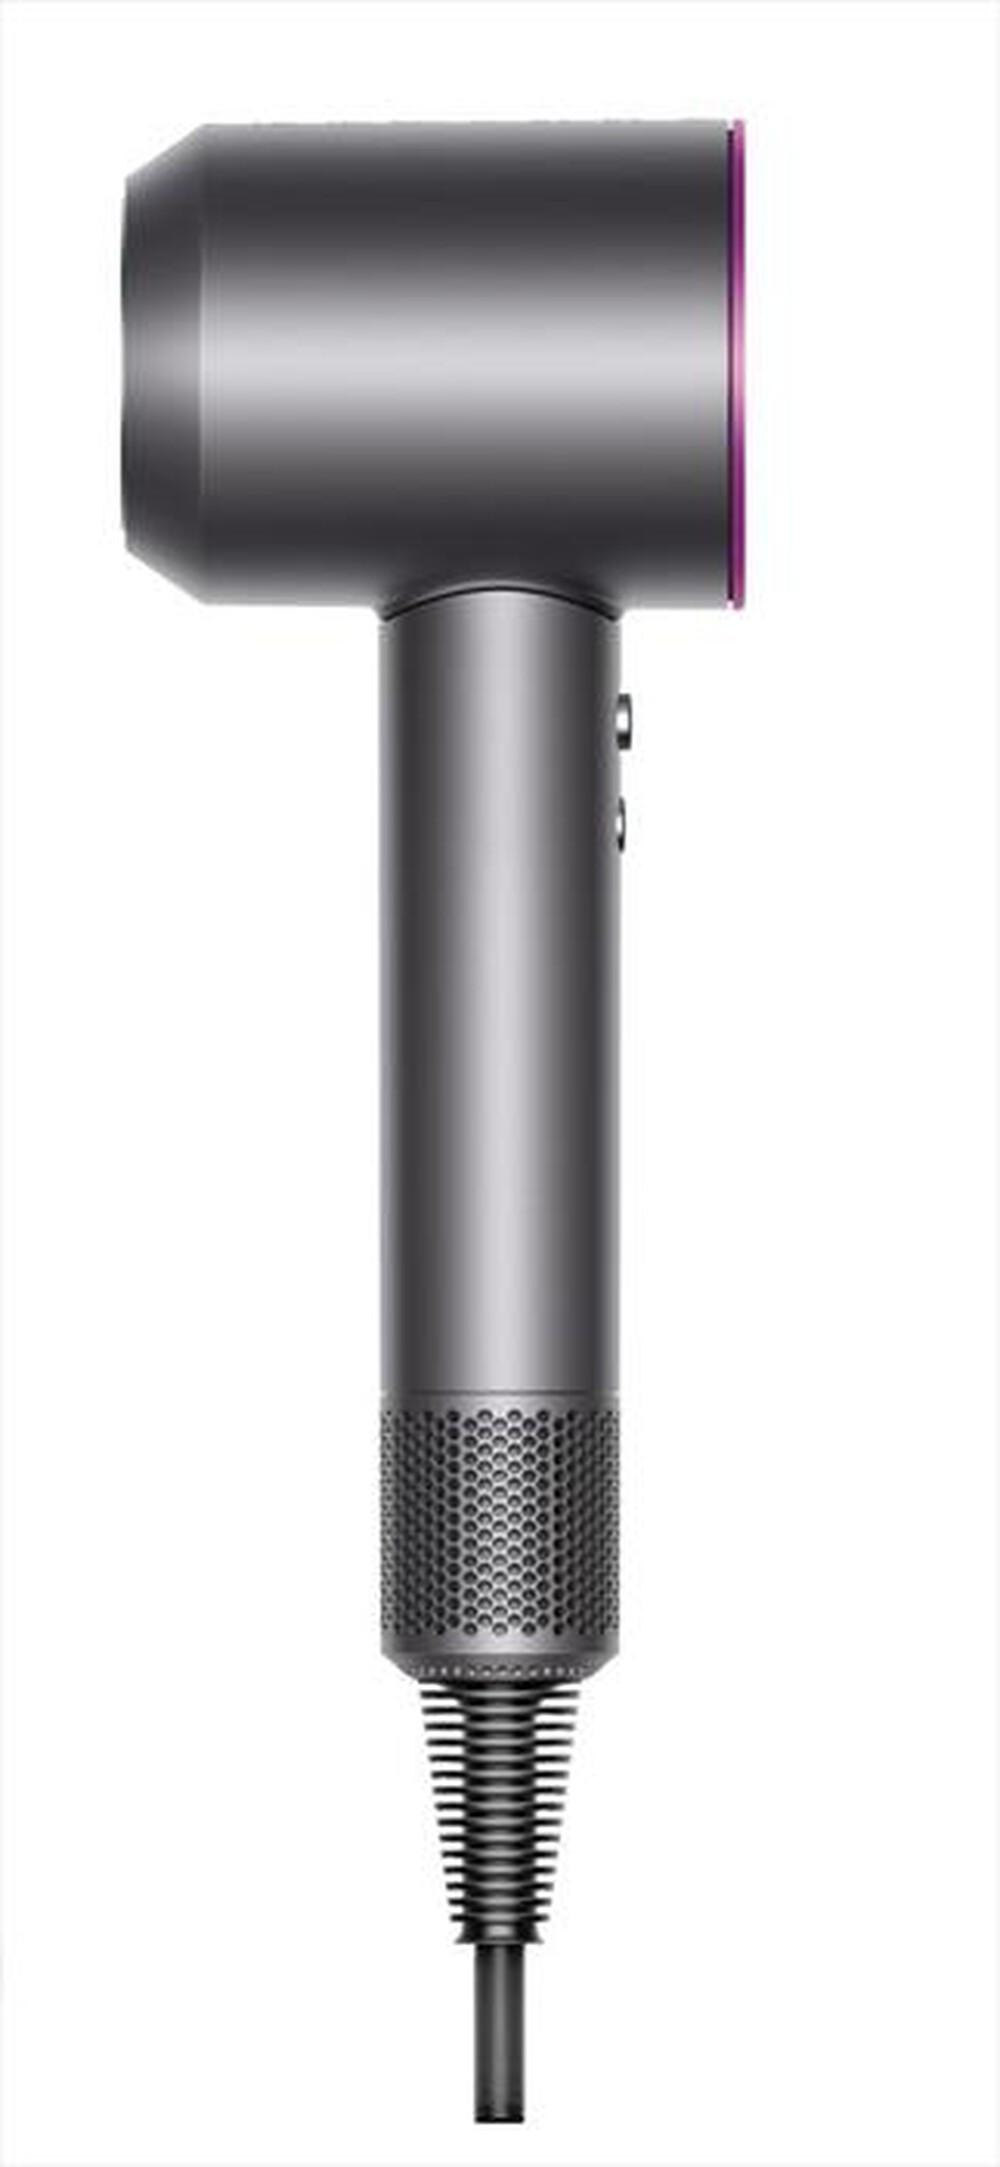 "DYSON - SUPERSONIC GENTLE AIR"